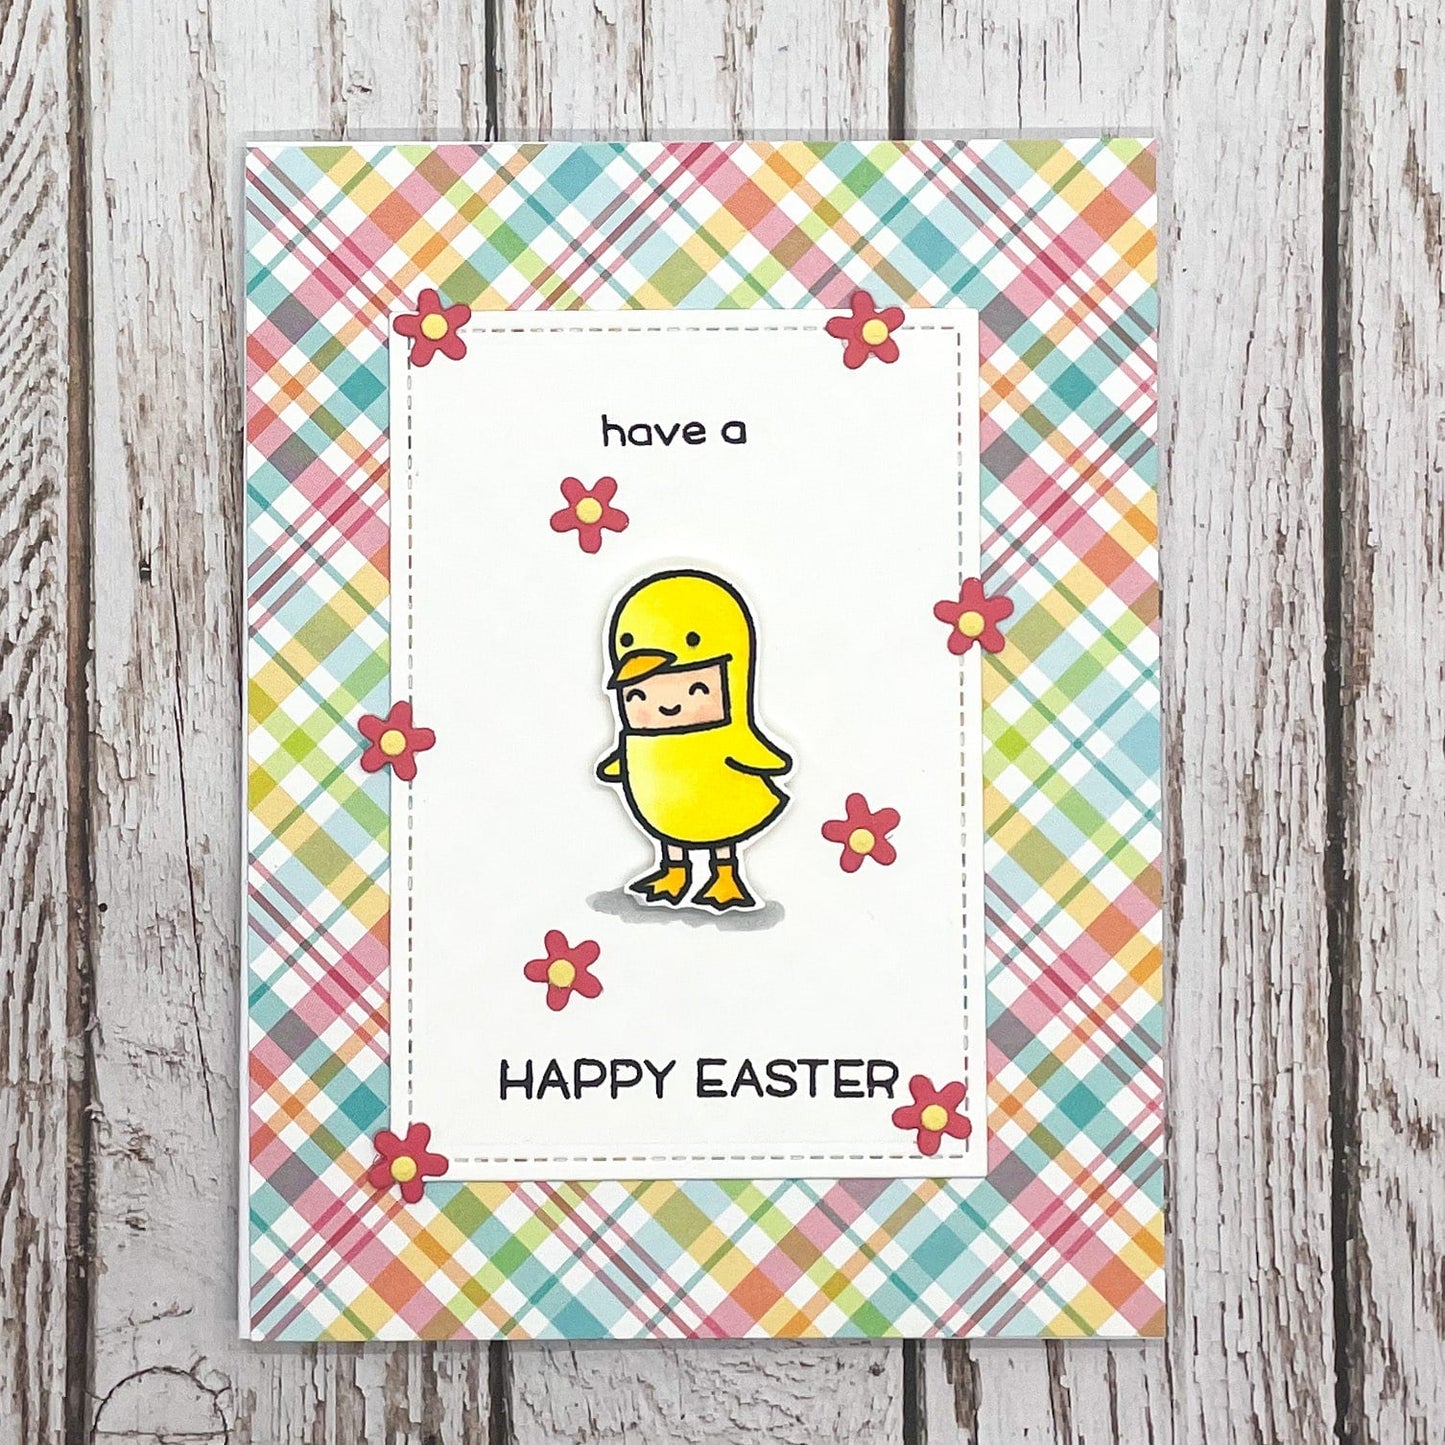 Dressed As Chick Happy Easter Handmade Card